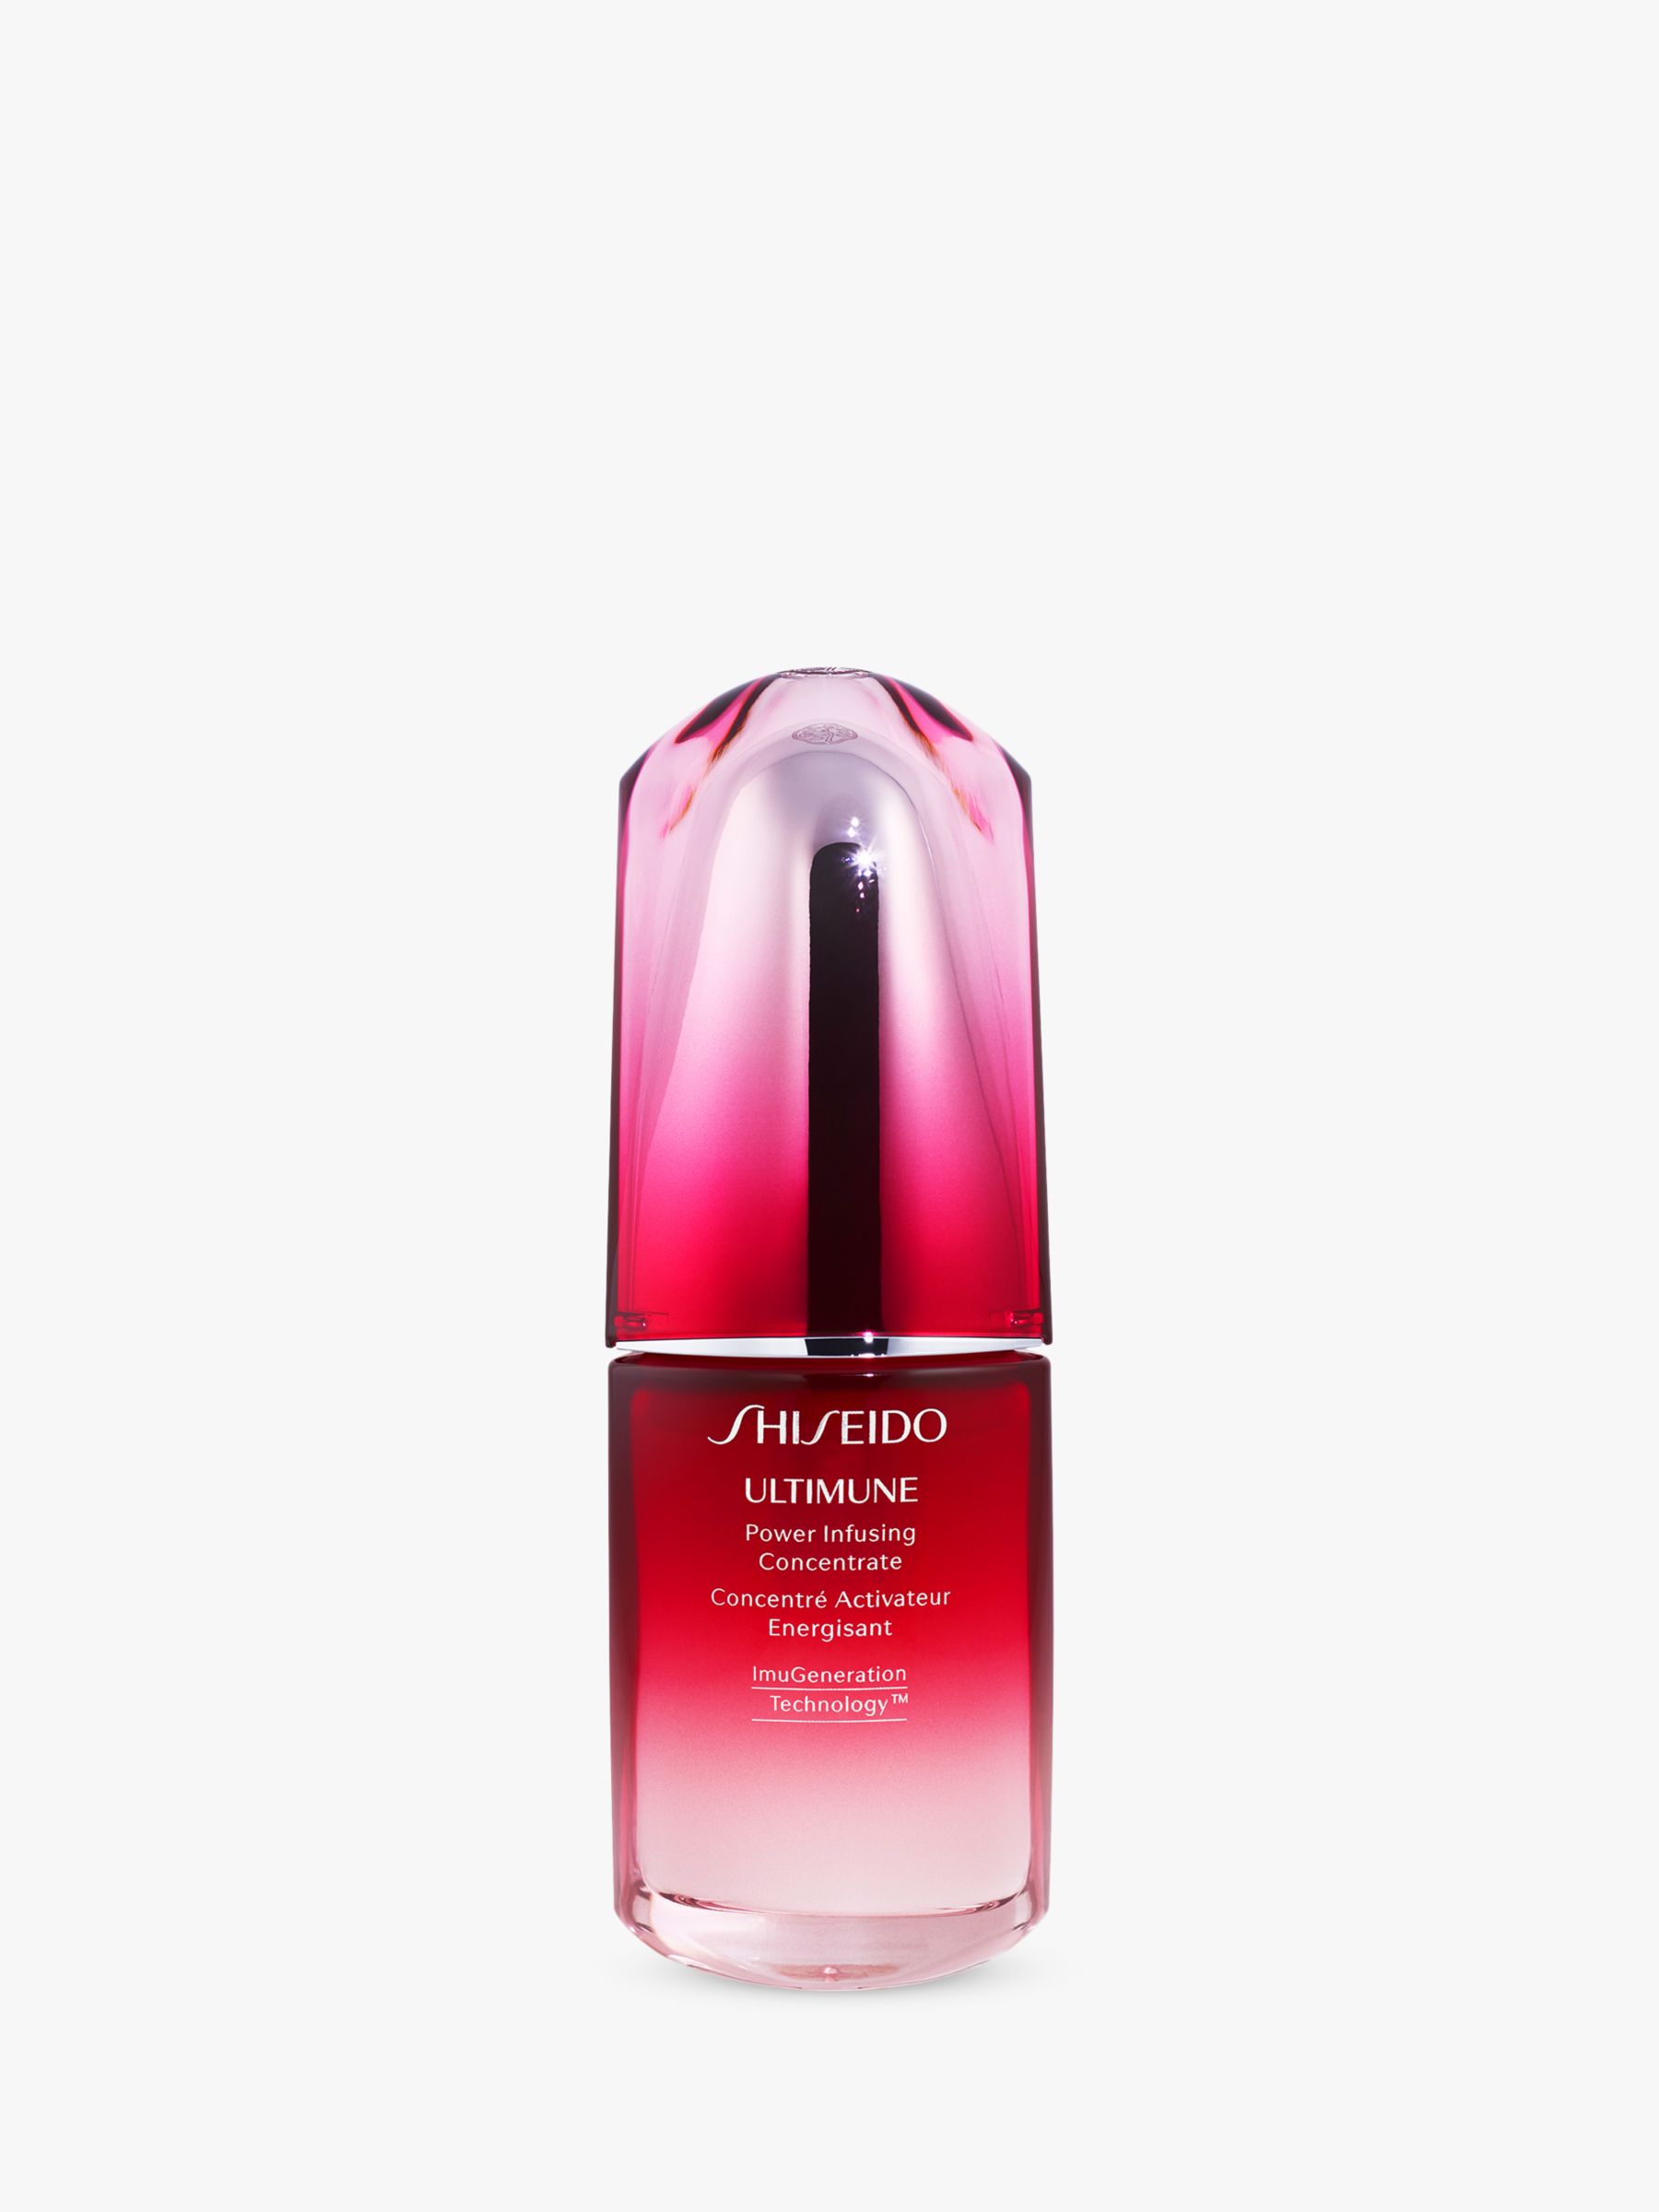 Shiseido ultimune power infusing concentrate. Шисейдо 203. Шисейдо Ultimune концентрат картинки. Shiseido Color Gel Wisteria.